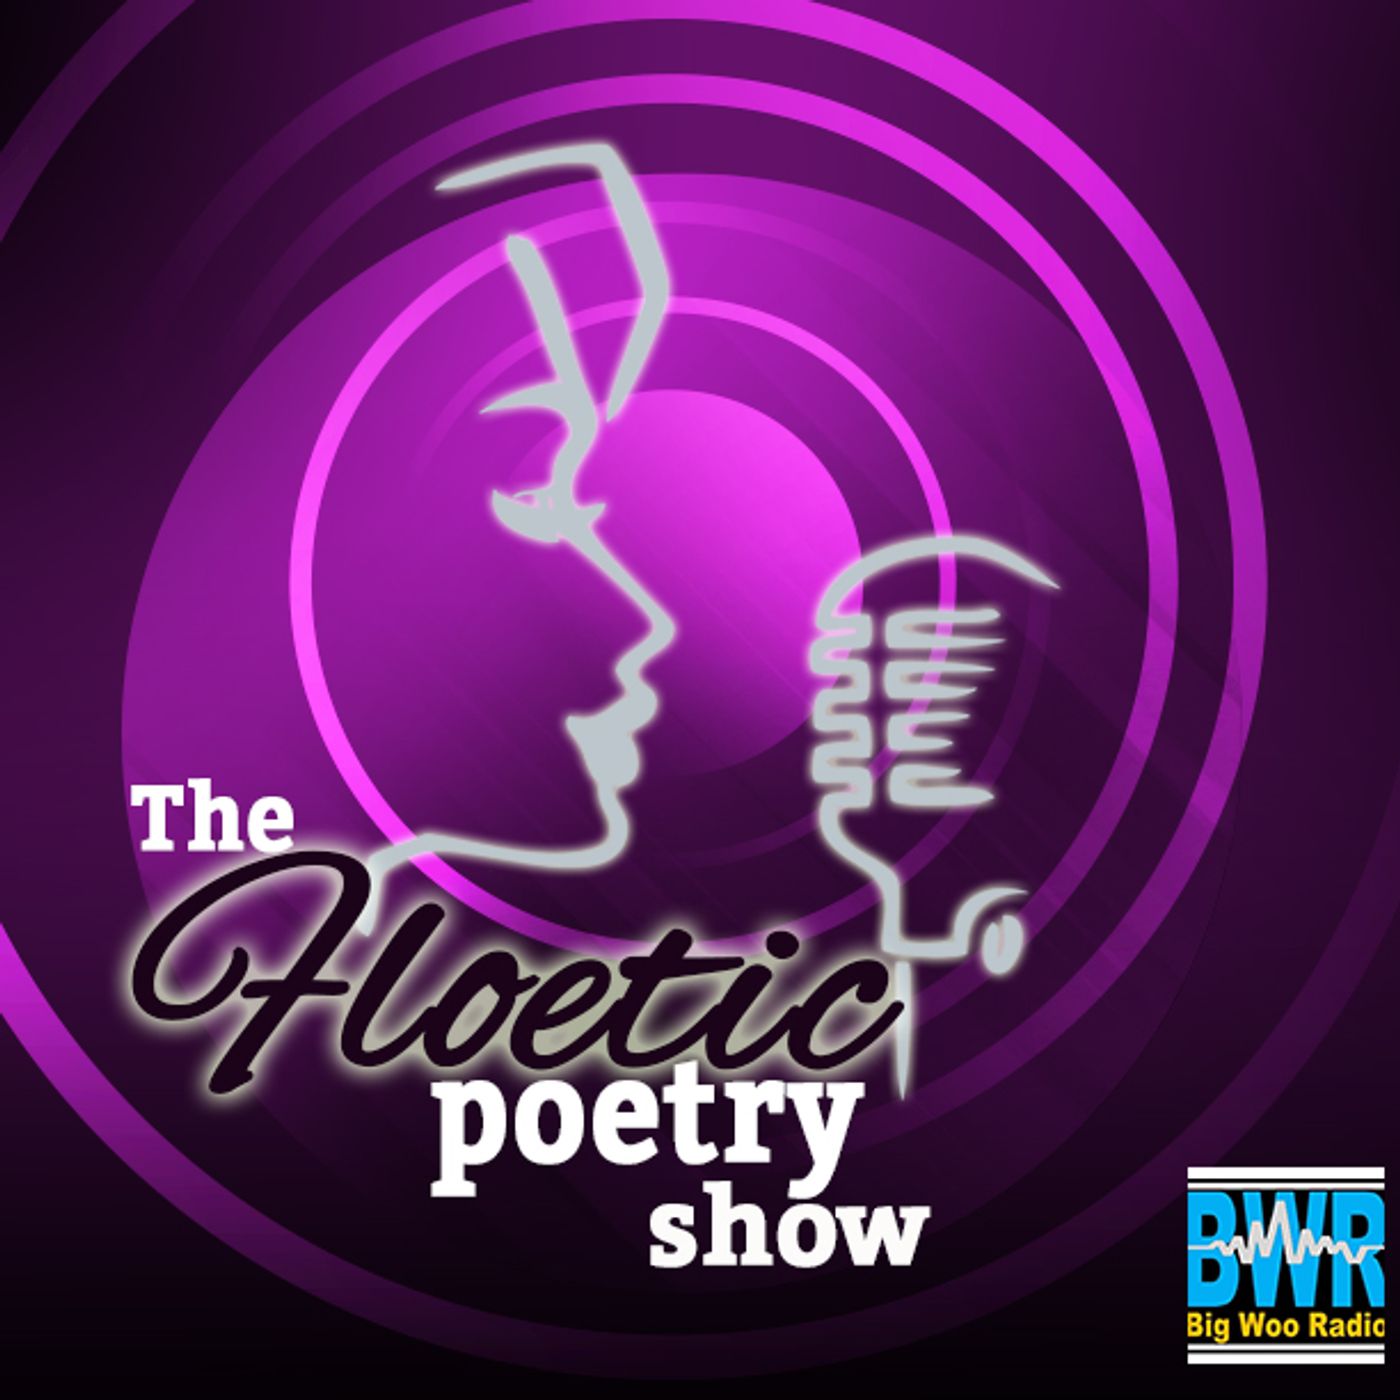 The Floetic Poetry Show